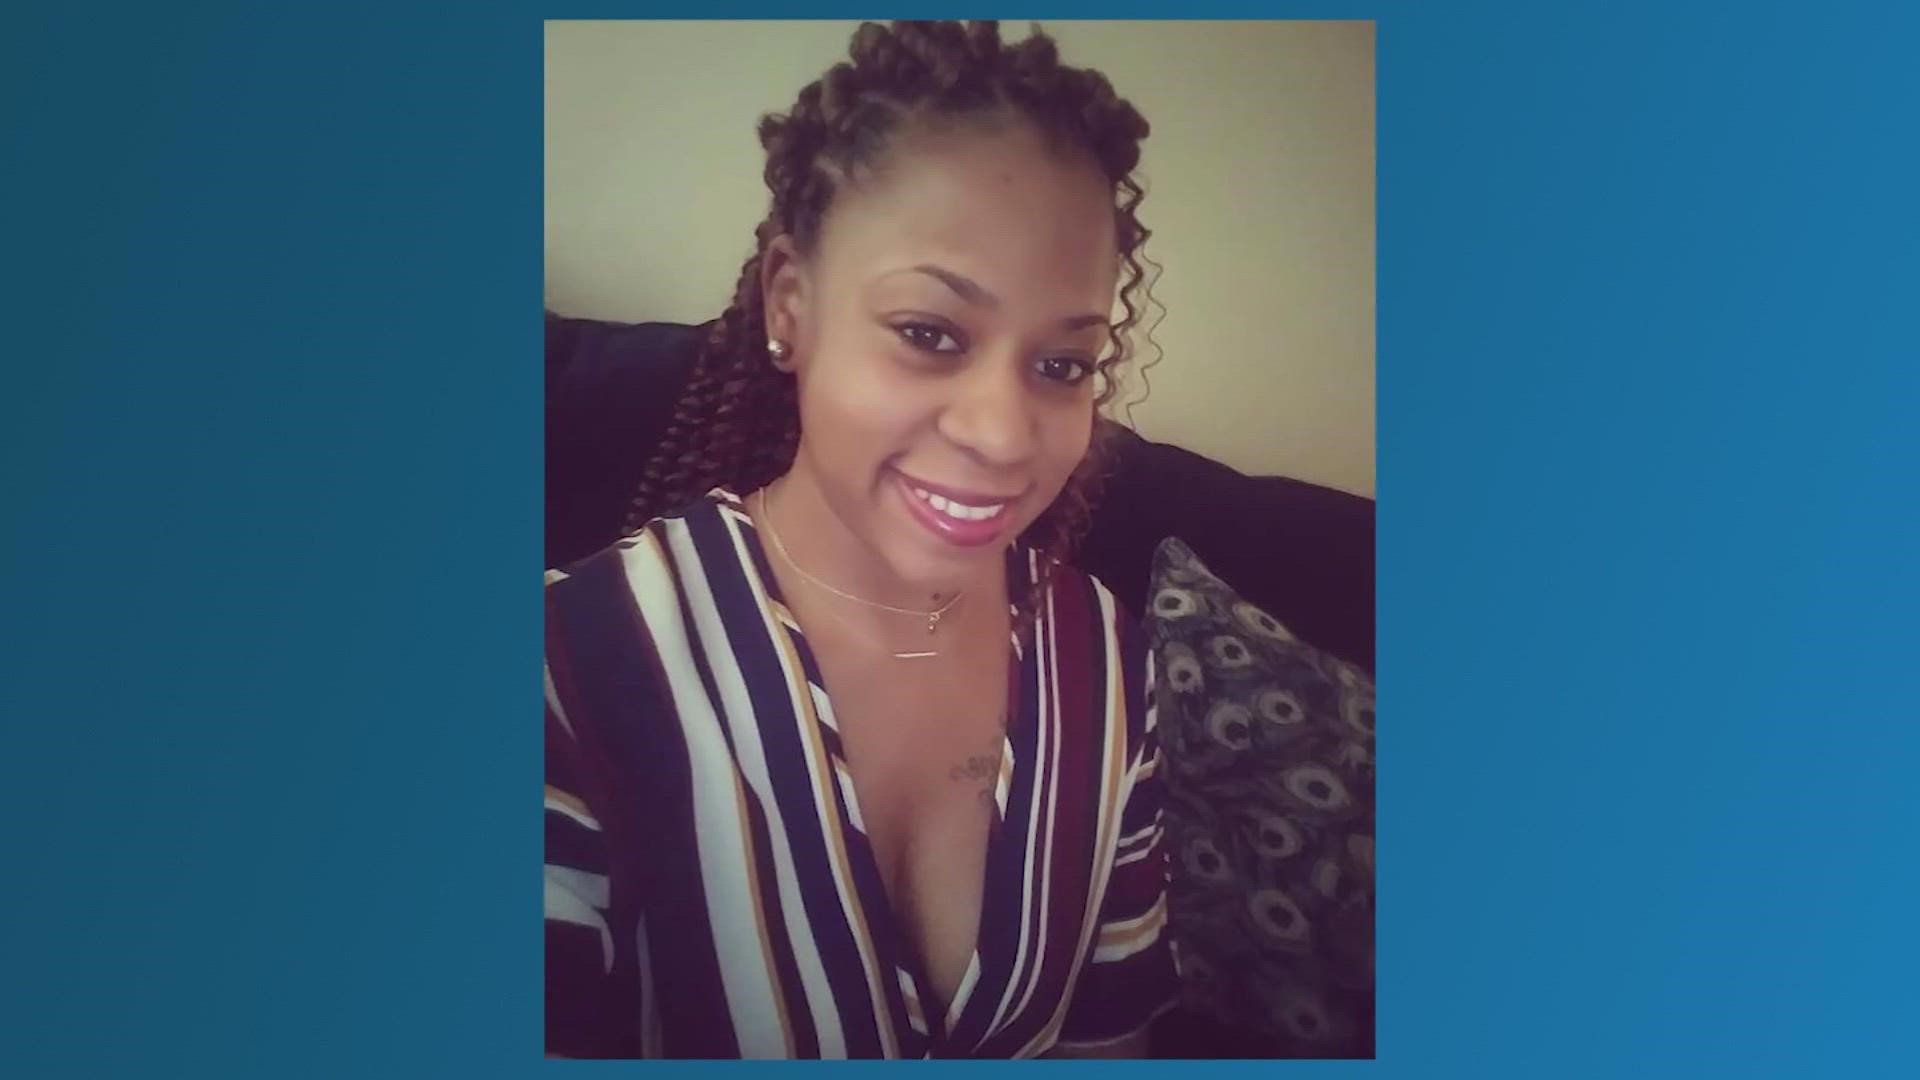 The woman has been identified by her family as Jadee Turner, 32.